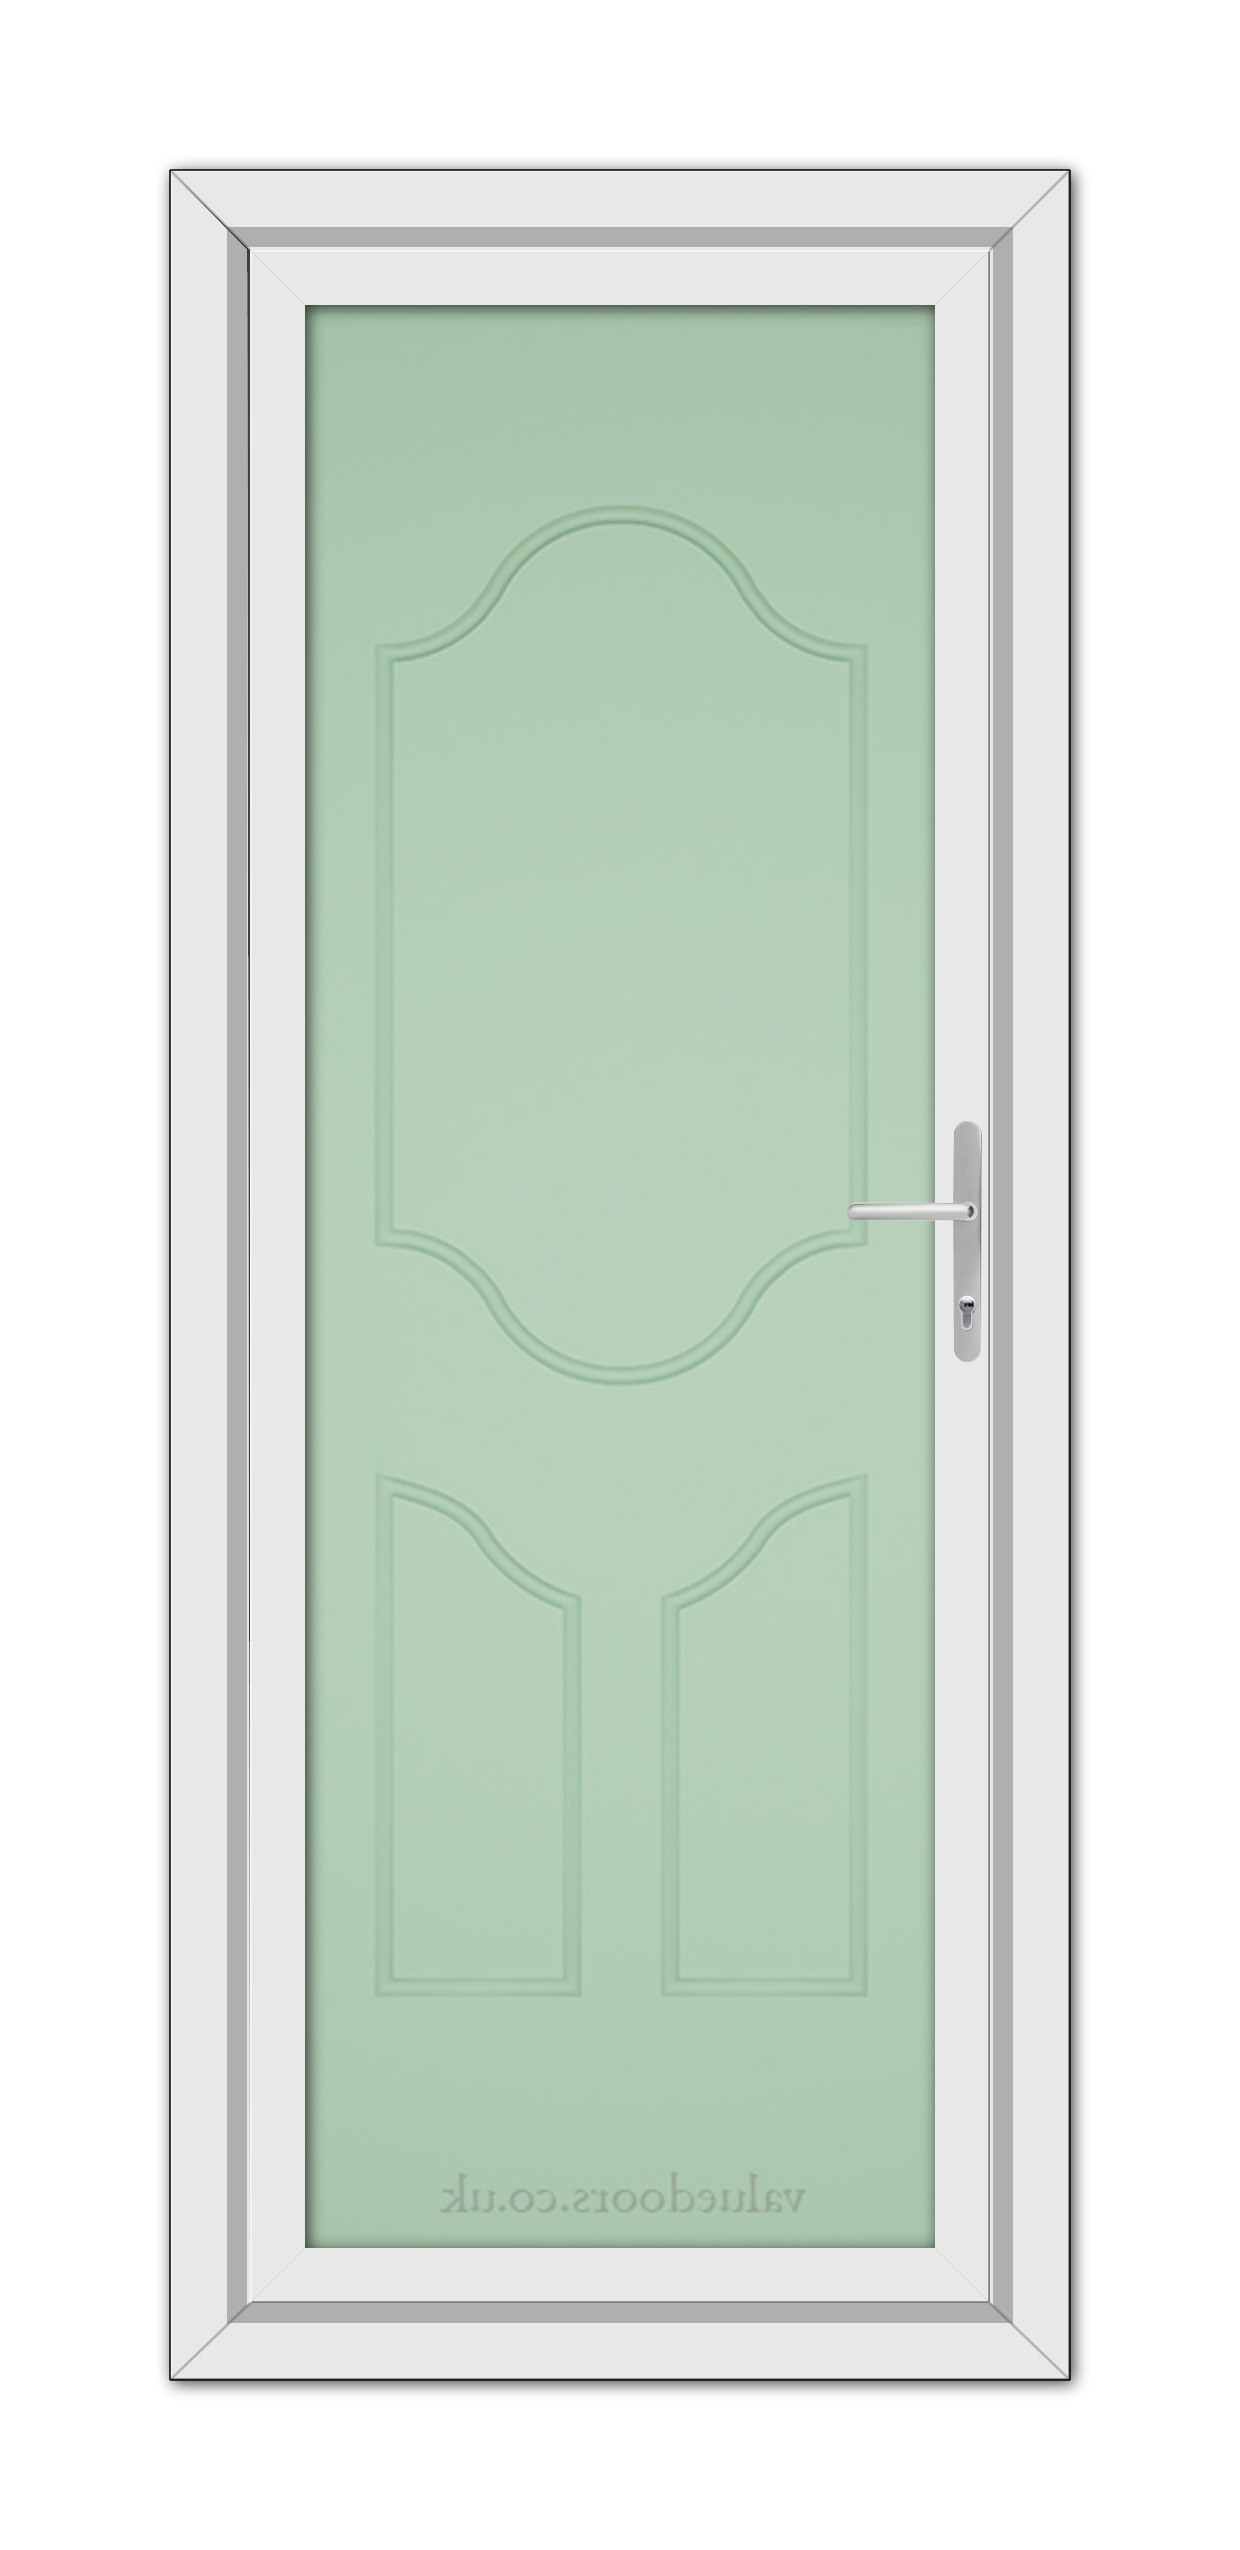 A white Chartwell Green Althorpe Solid uPVC Door with a green door handle.